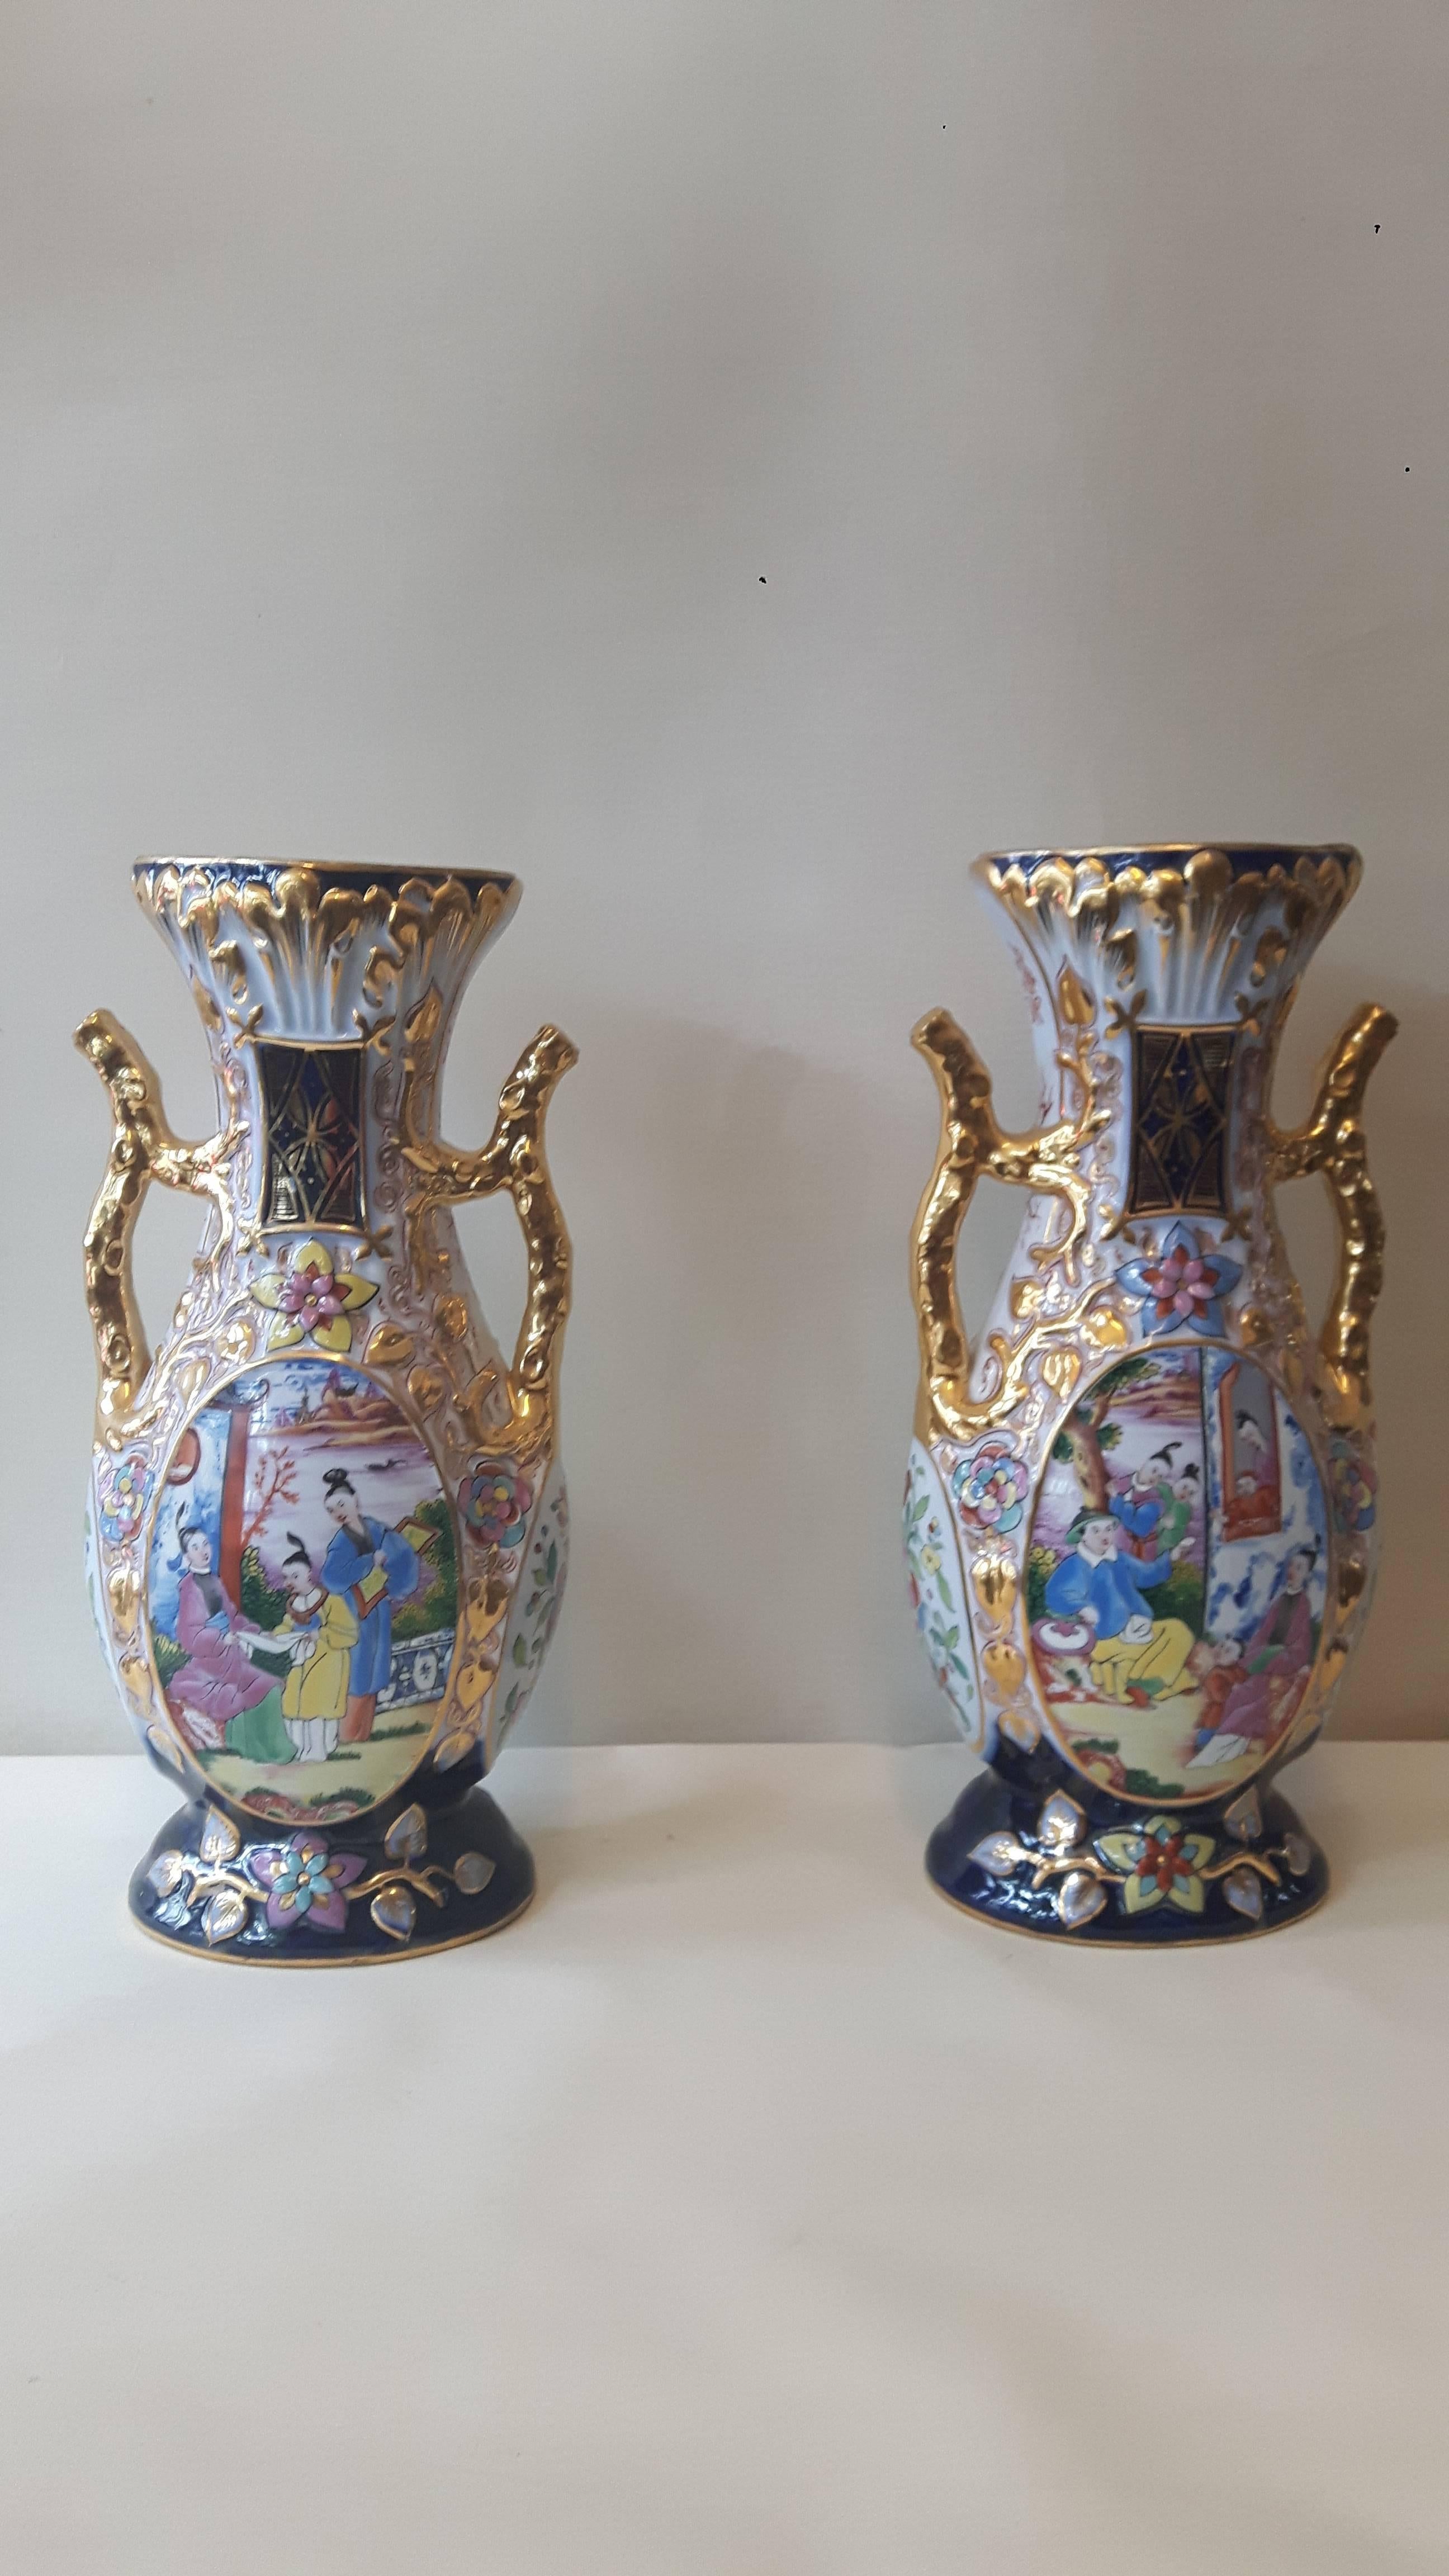 A very ornate pair of Samson Paris porcelain vases, entirely hand-painted in Cantonese chinoiserie fashion, heavily gilded, circa 1880.